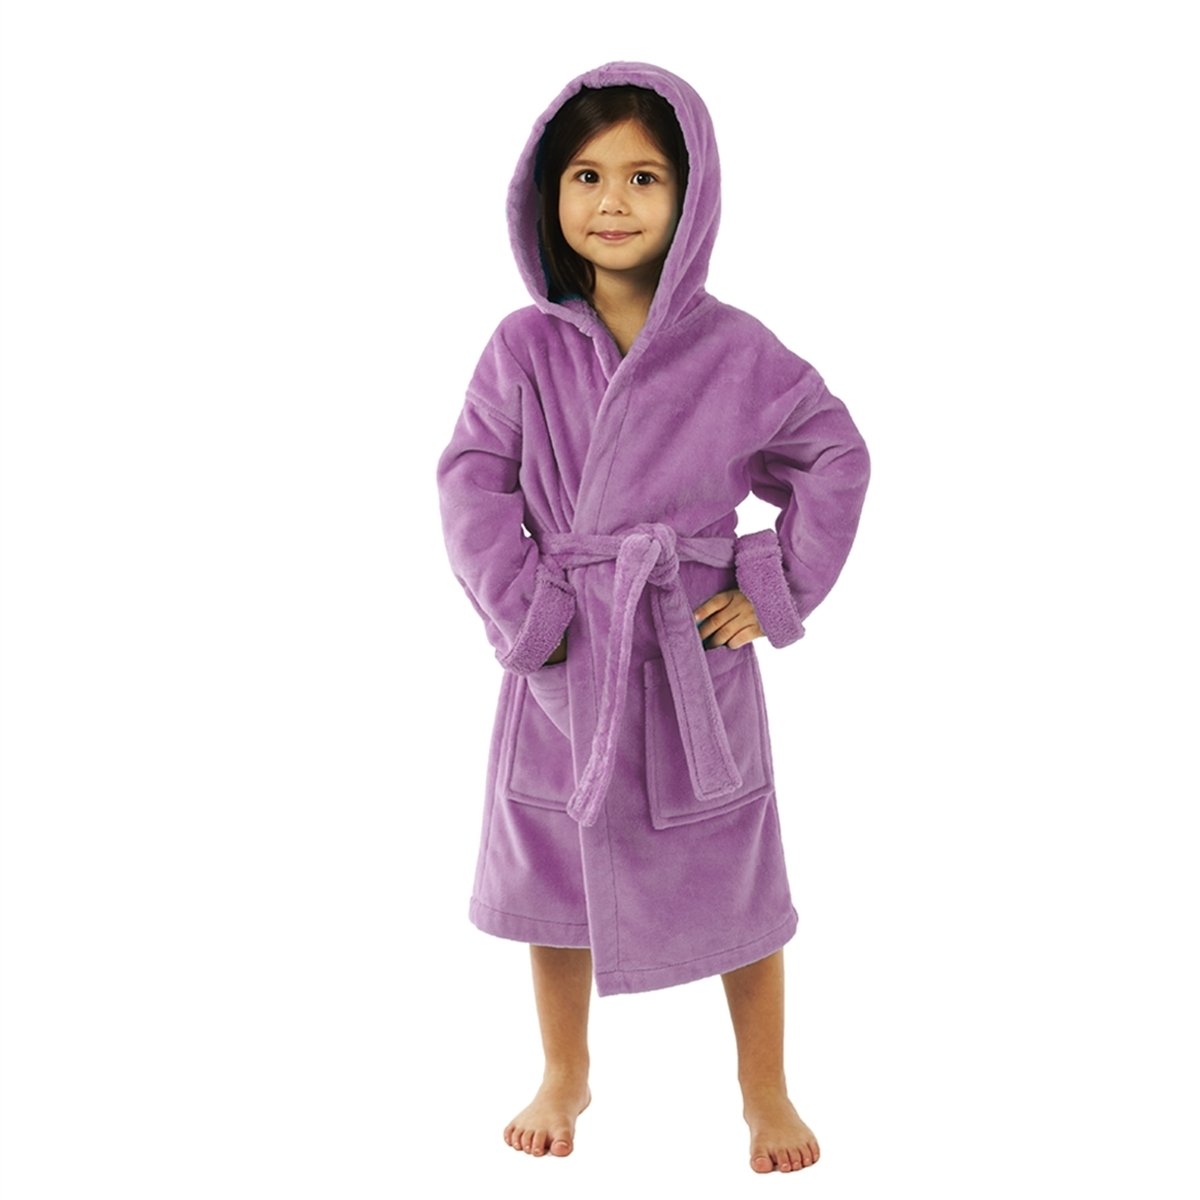 Ultimate Terry Velour Hooded Towels for Monogrammers